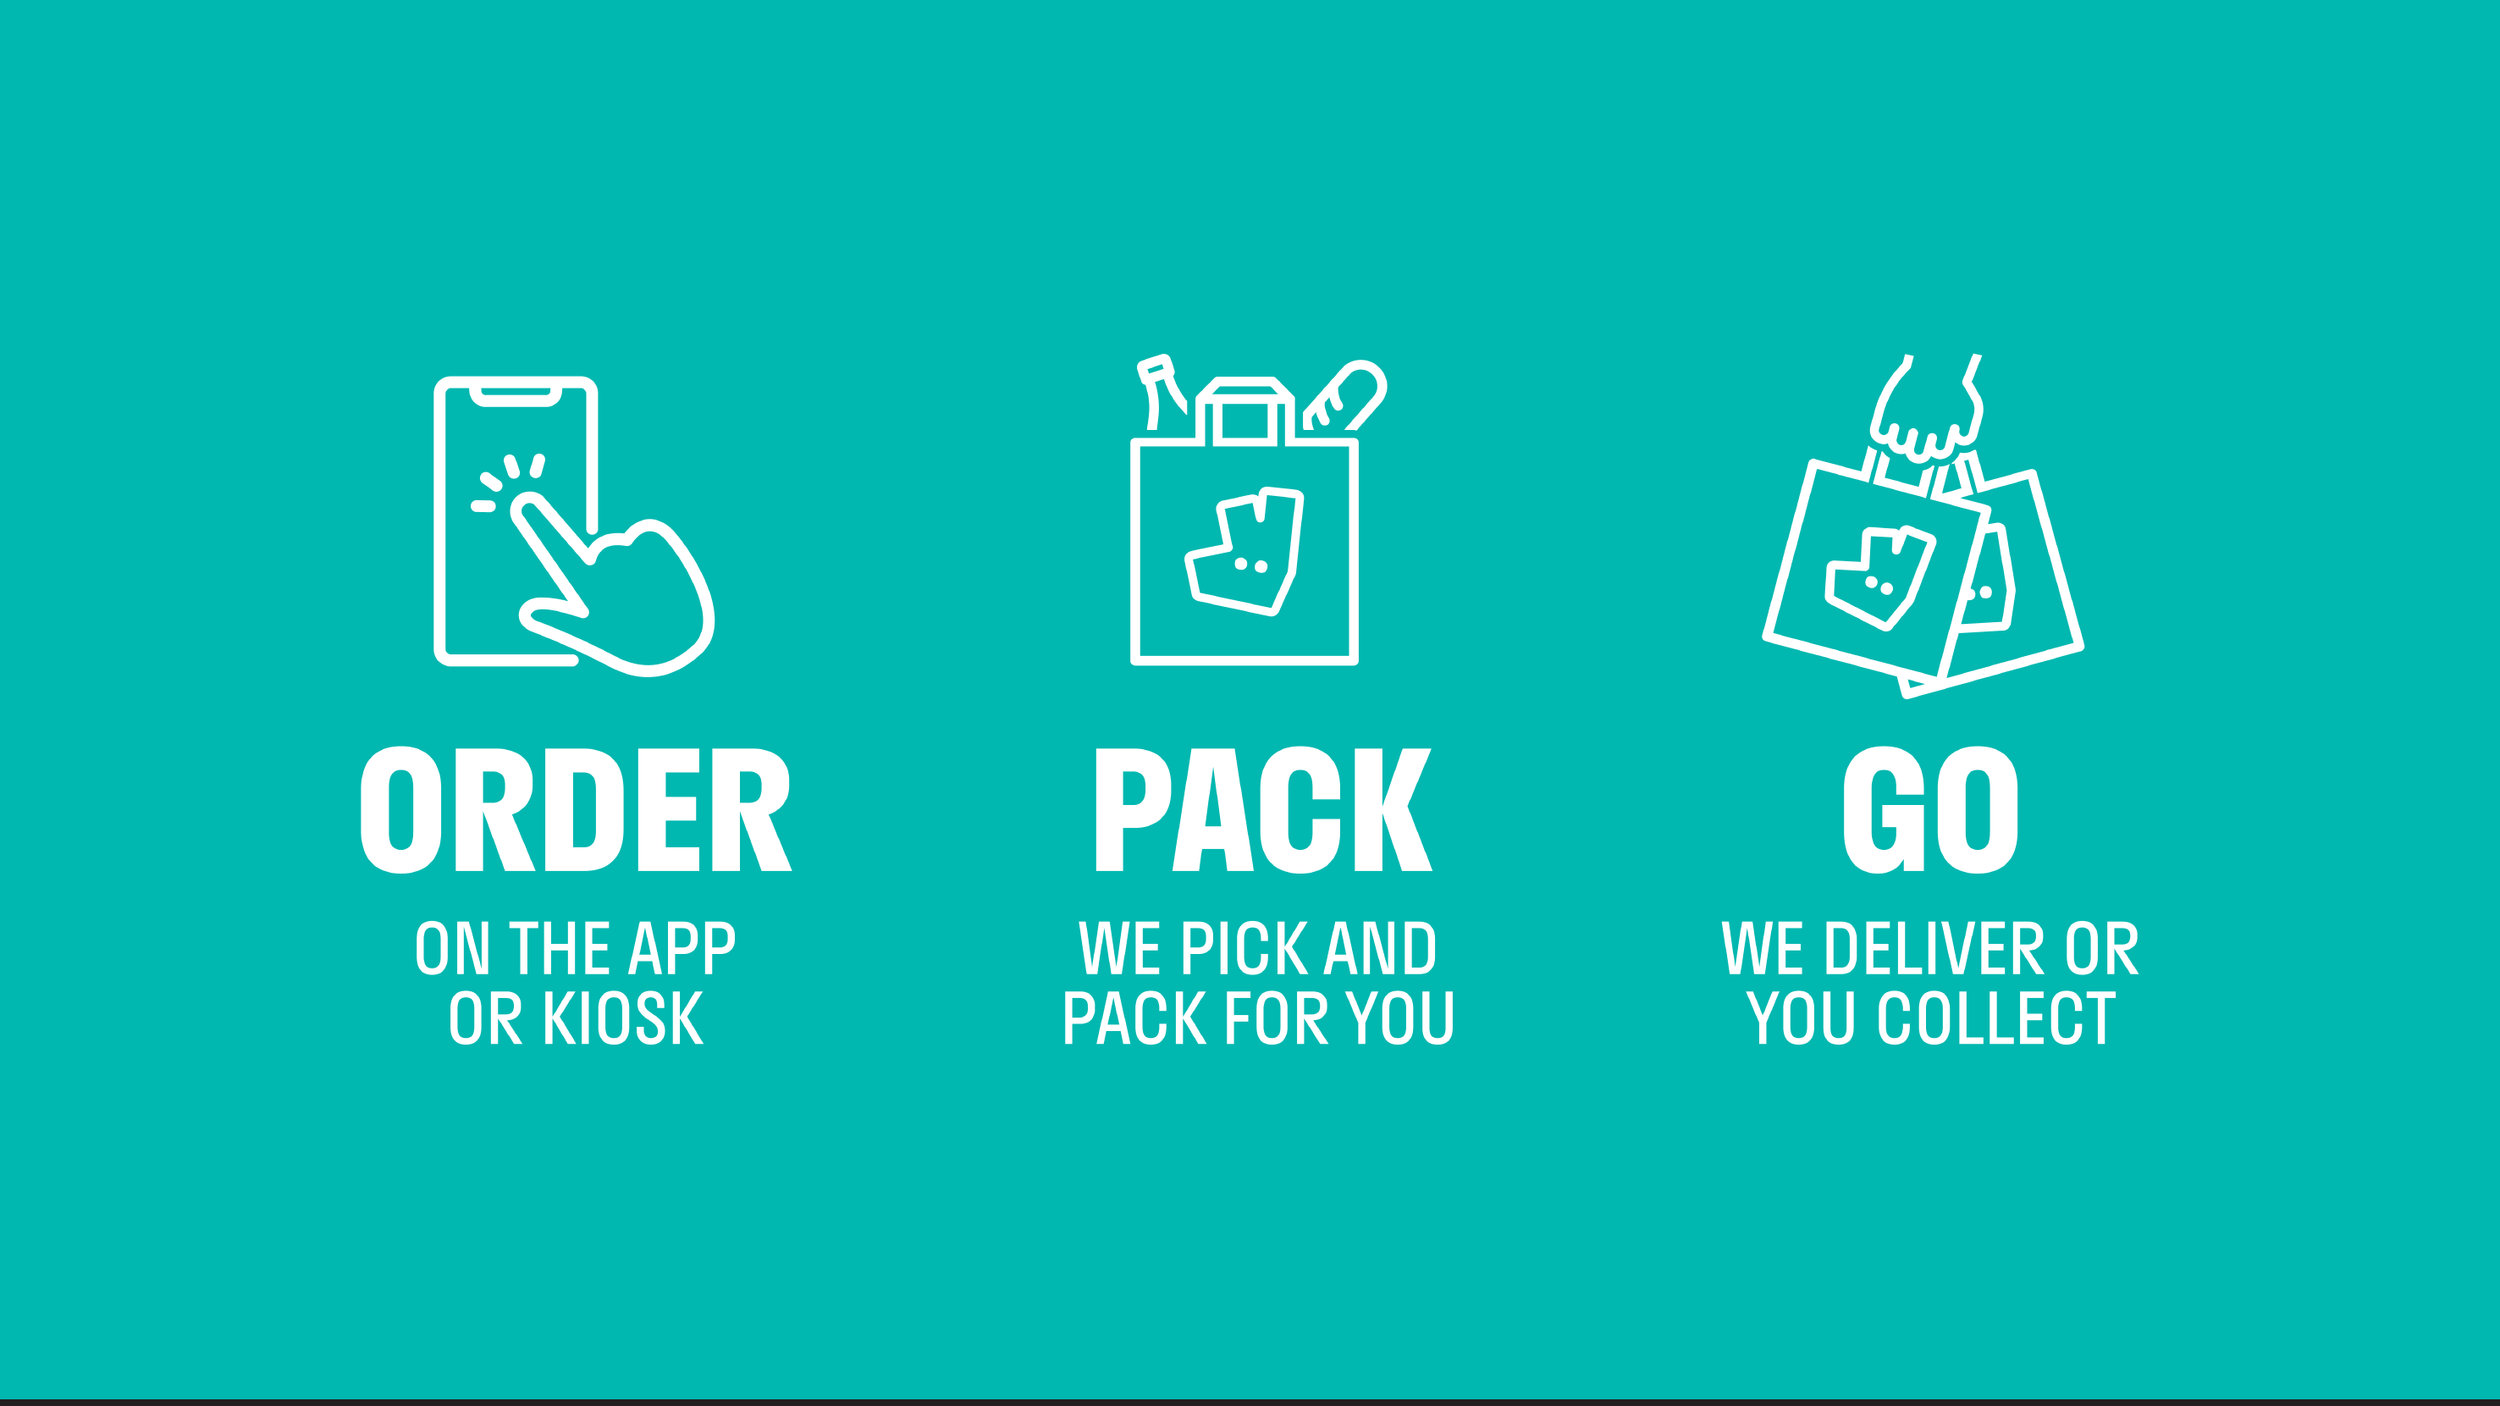 Deliveroo case study layout-JC-09.png